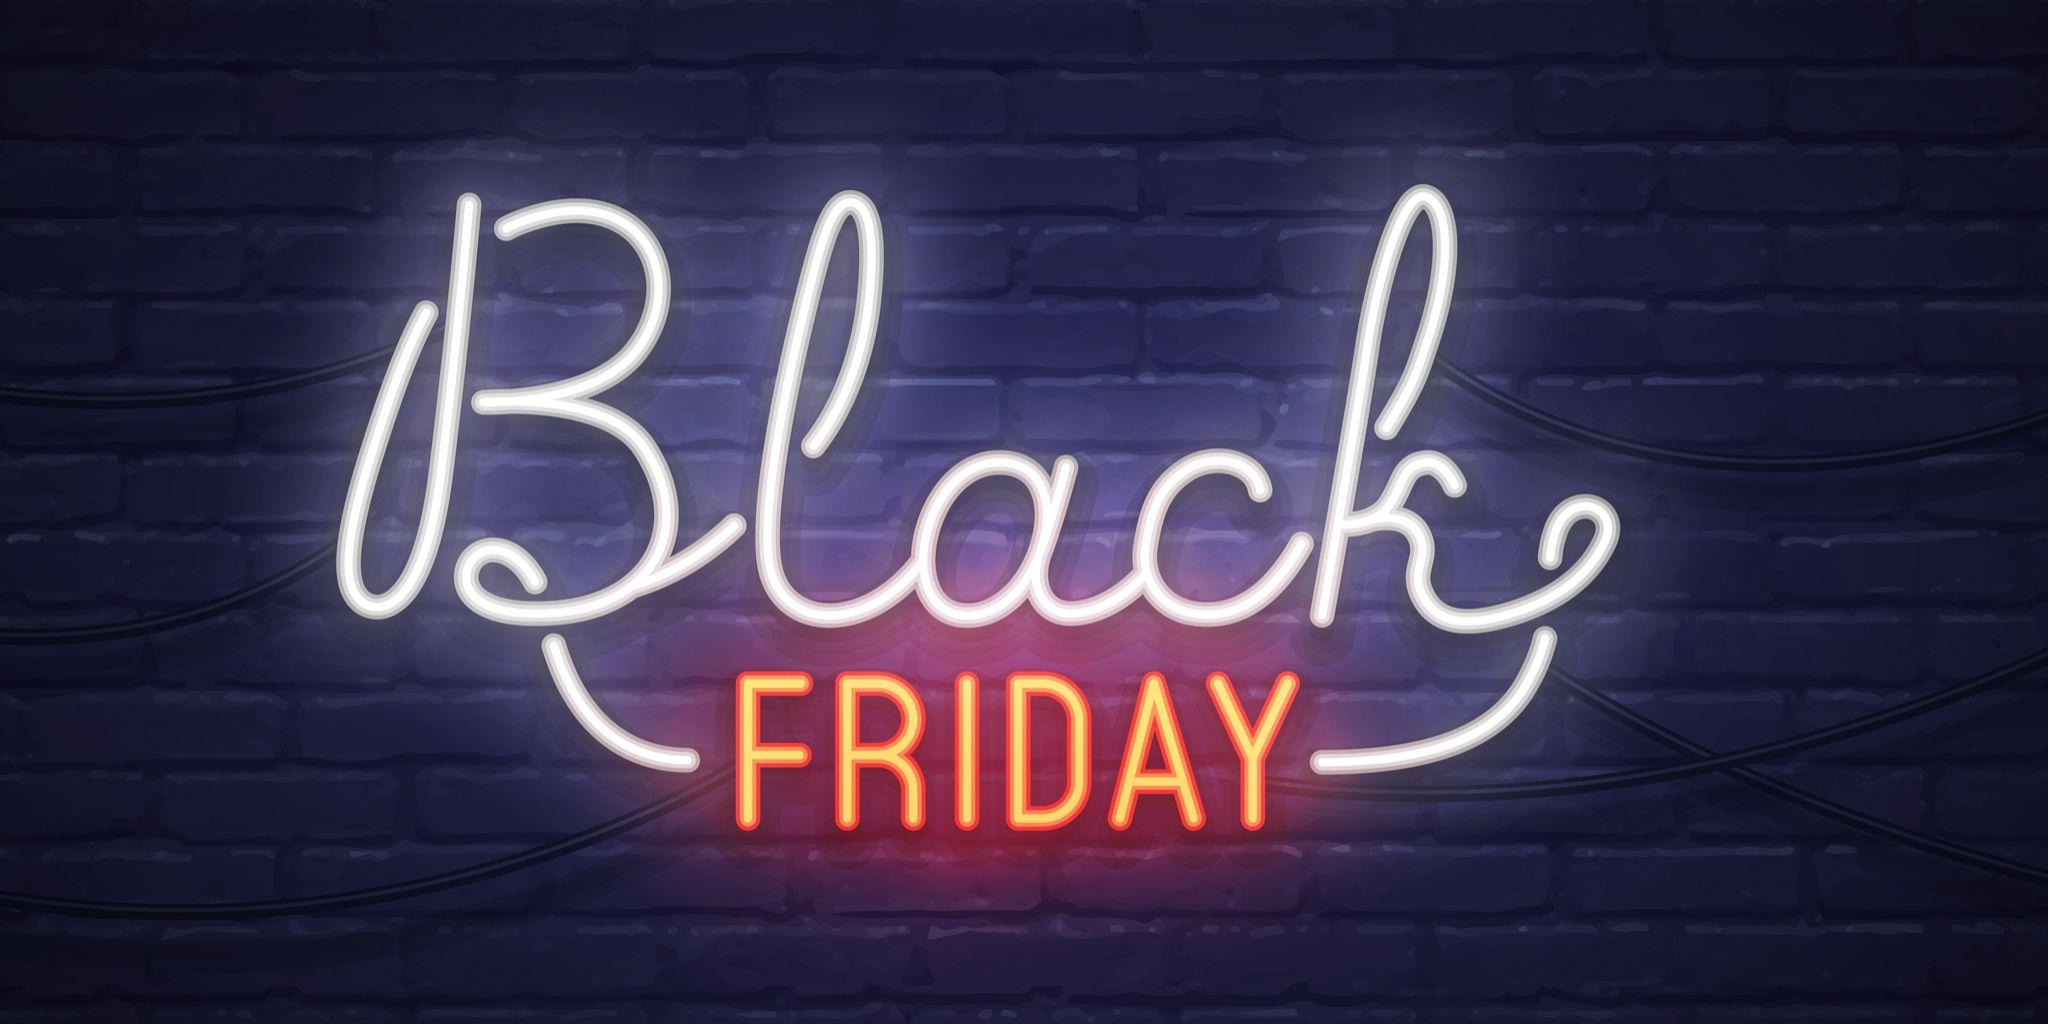 The best Black Friday UK deals and discounts 2018